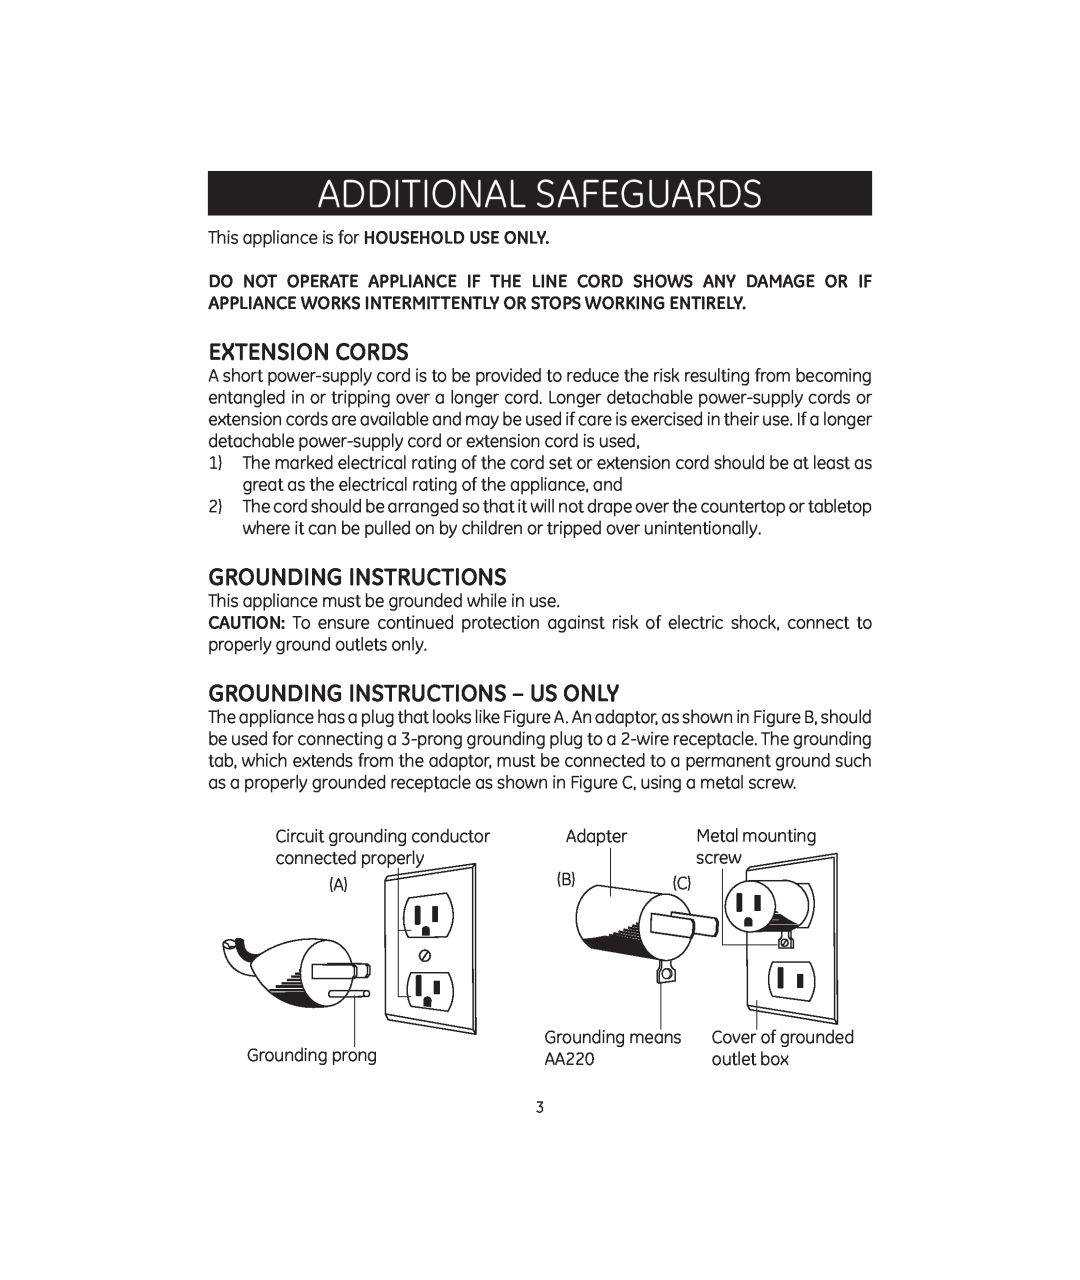 GE 681131692151 manual Additional Safeguards, Extension Cords, Grounding Instructions - Us Only 